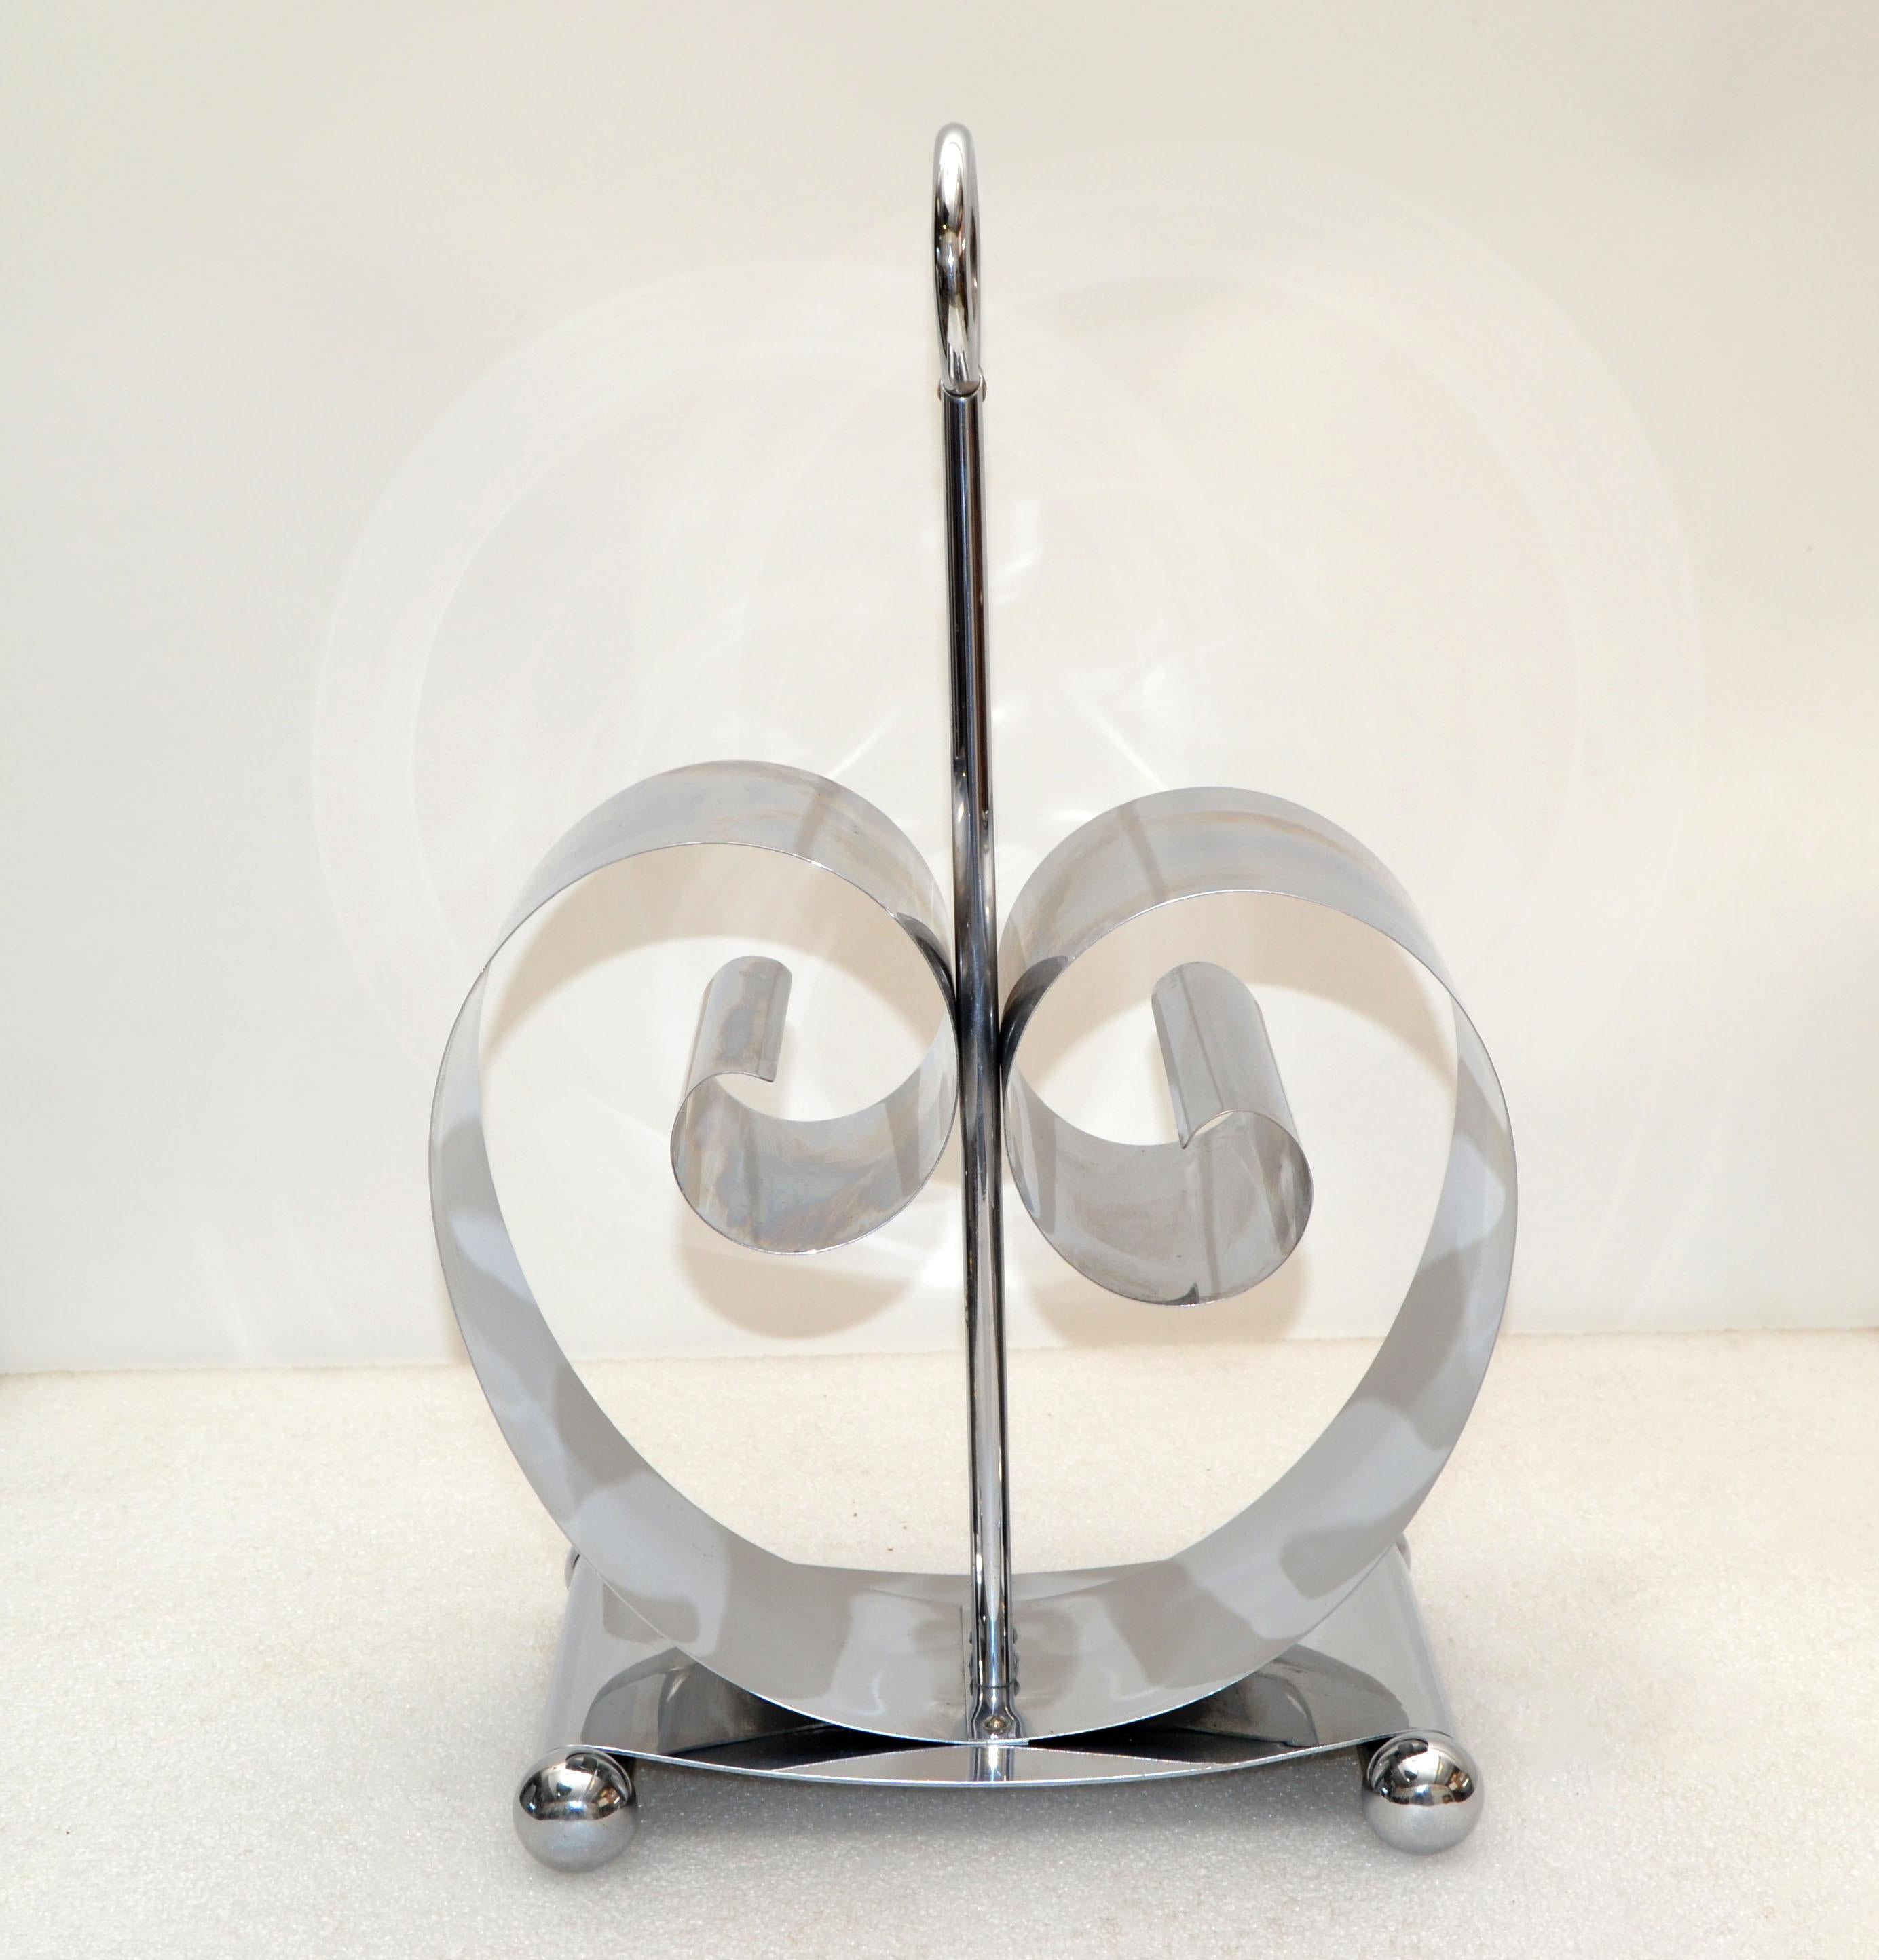 Art Deco Norman Bel Geddes Chrome Plated Stainless Steel Magazine Stand Rack 30s For Sale 2